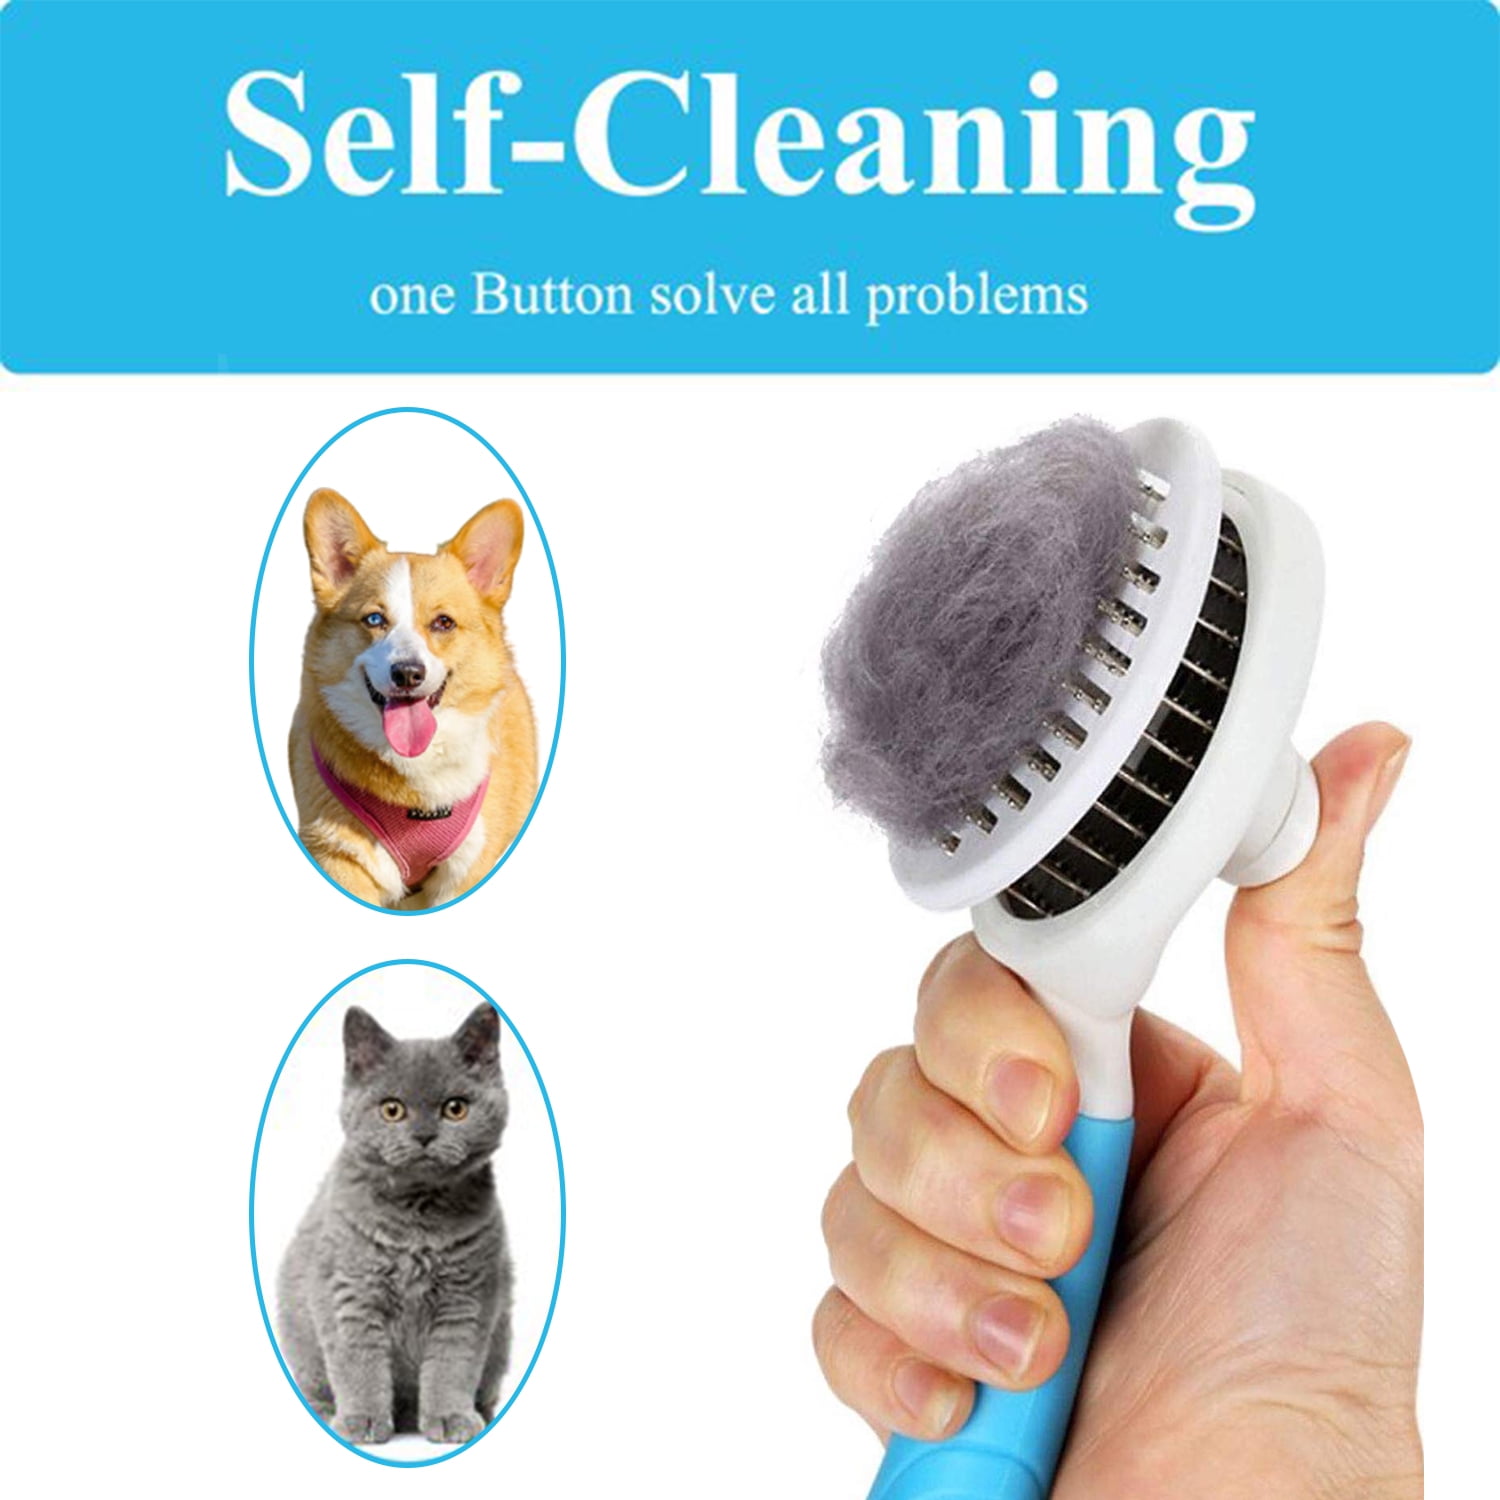 Dog Comb for Removes Tangles and Knots Pet Comb for Long /& Short Haired dog cat bunny /& other pets Removes Tangles Hair Knots Loose Fur /& Dirt Grooming Tool with Stainless Steel Teeth and Ergonomic Grip Handle